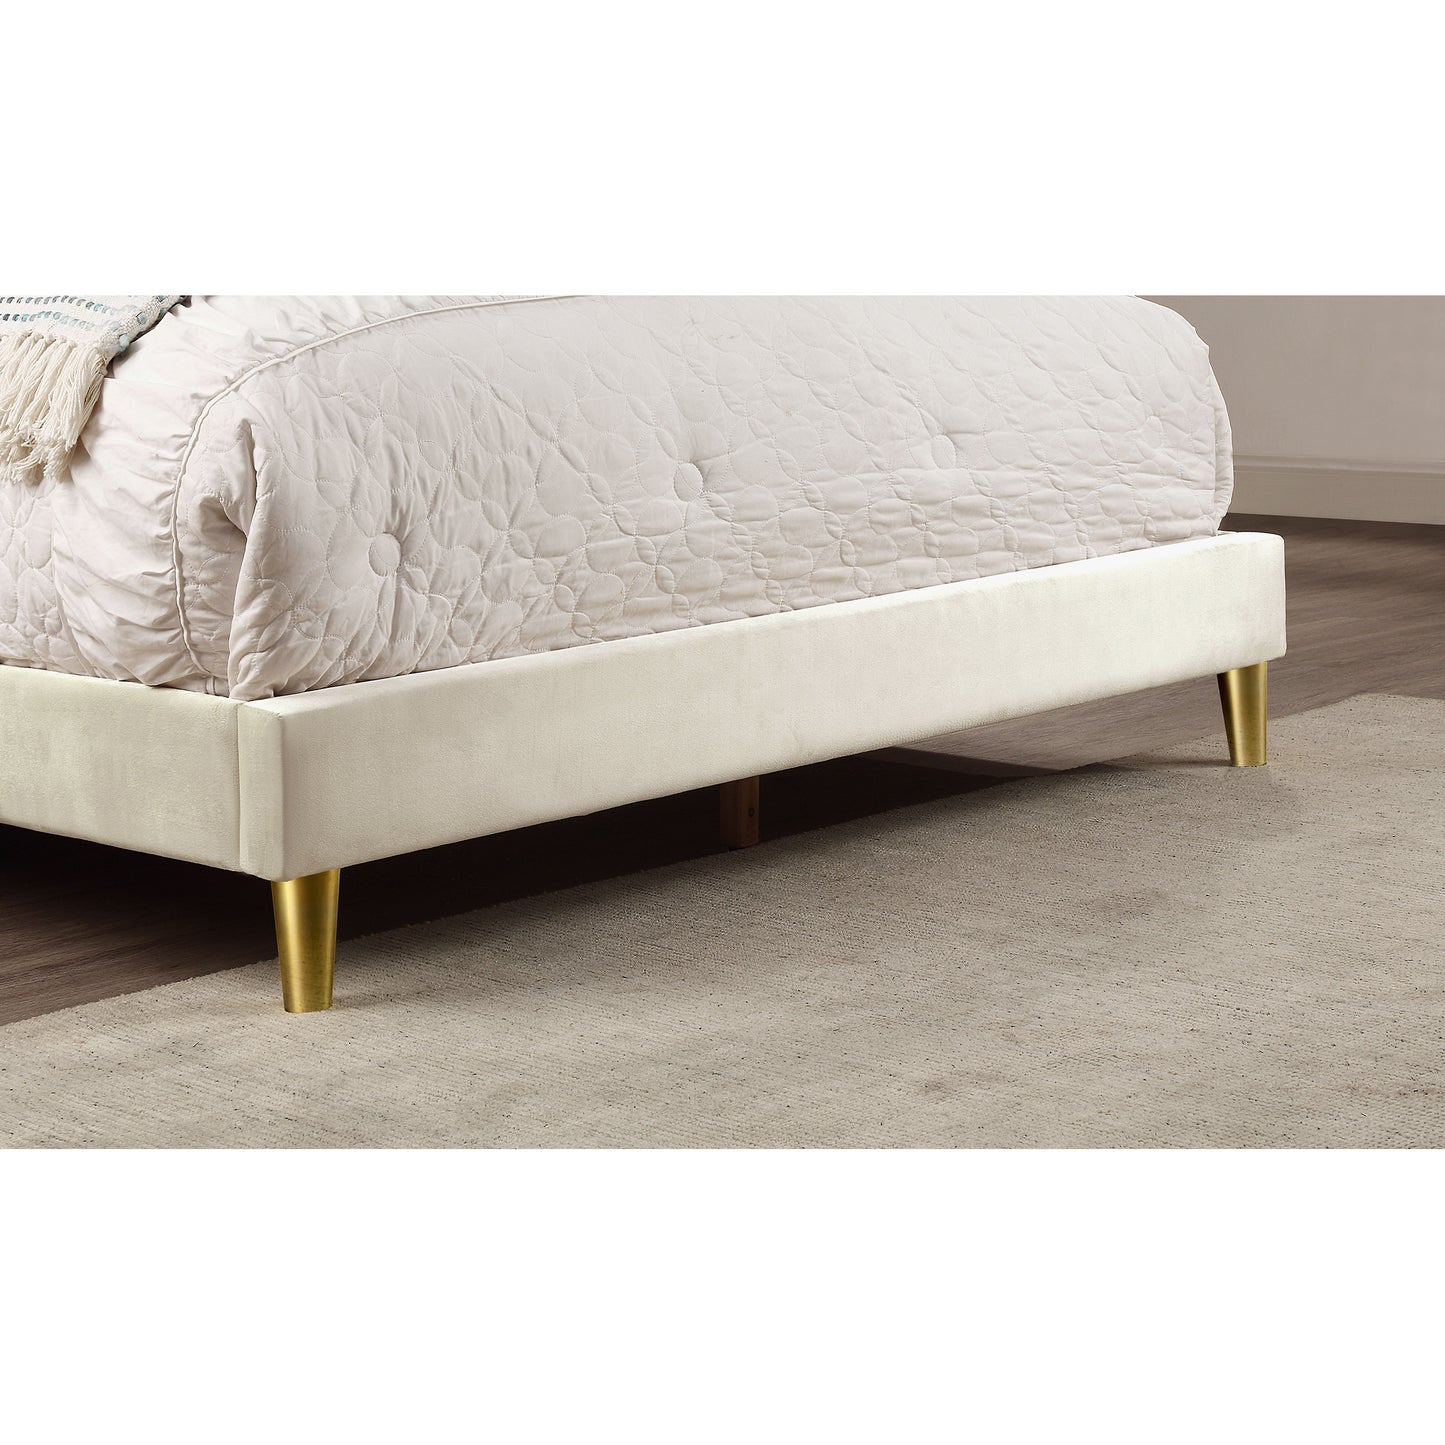 Right angled footboard close-up of a contemporary beige and gold upholstered full bed in a bedroom with accessories